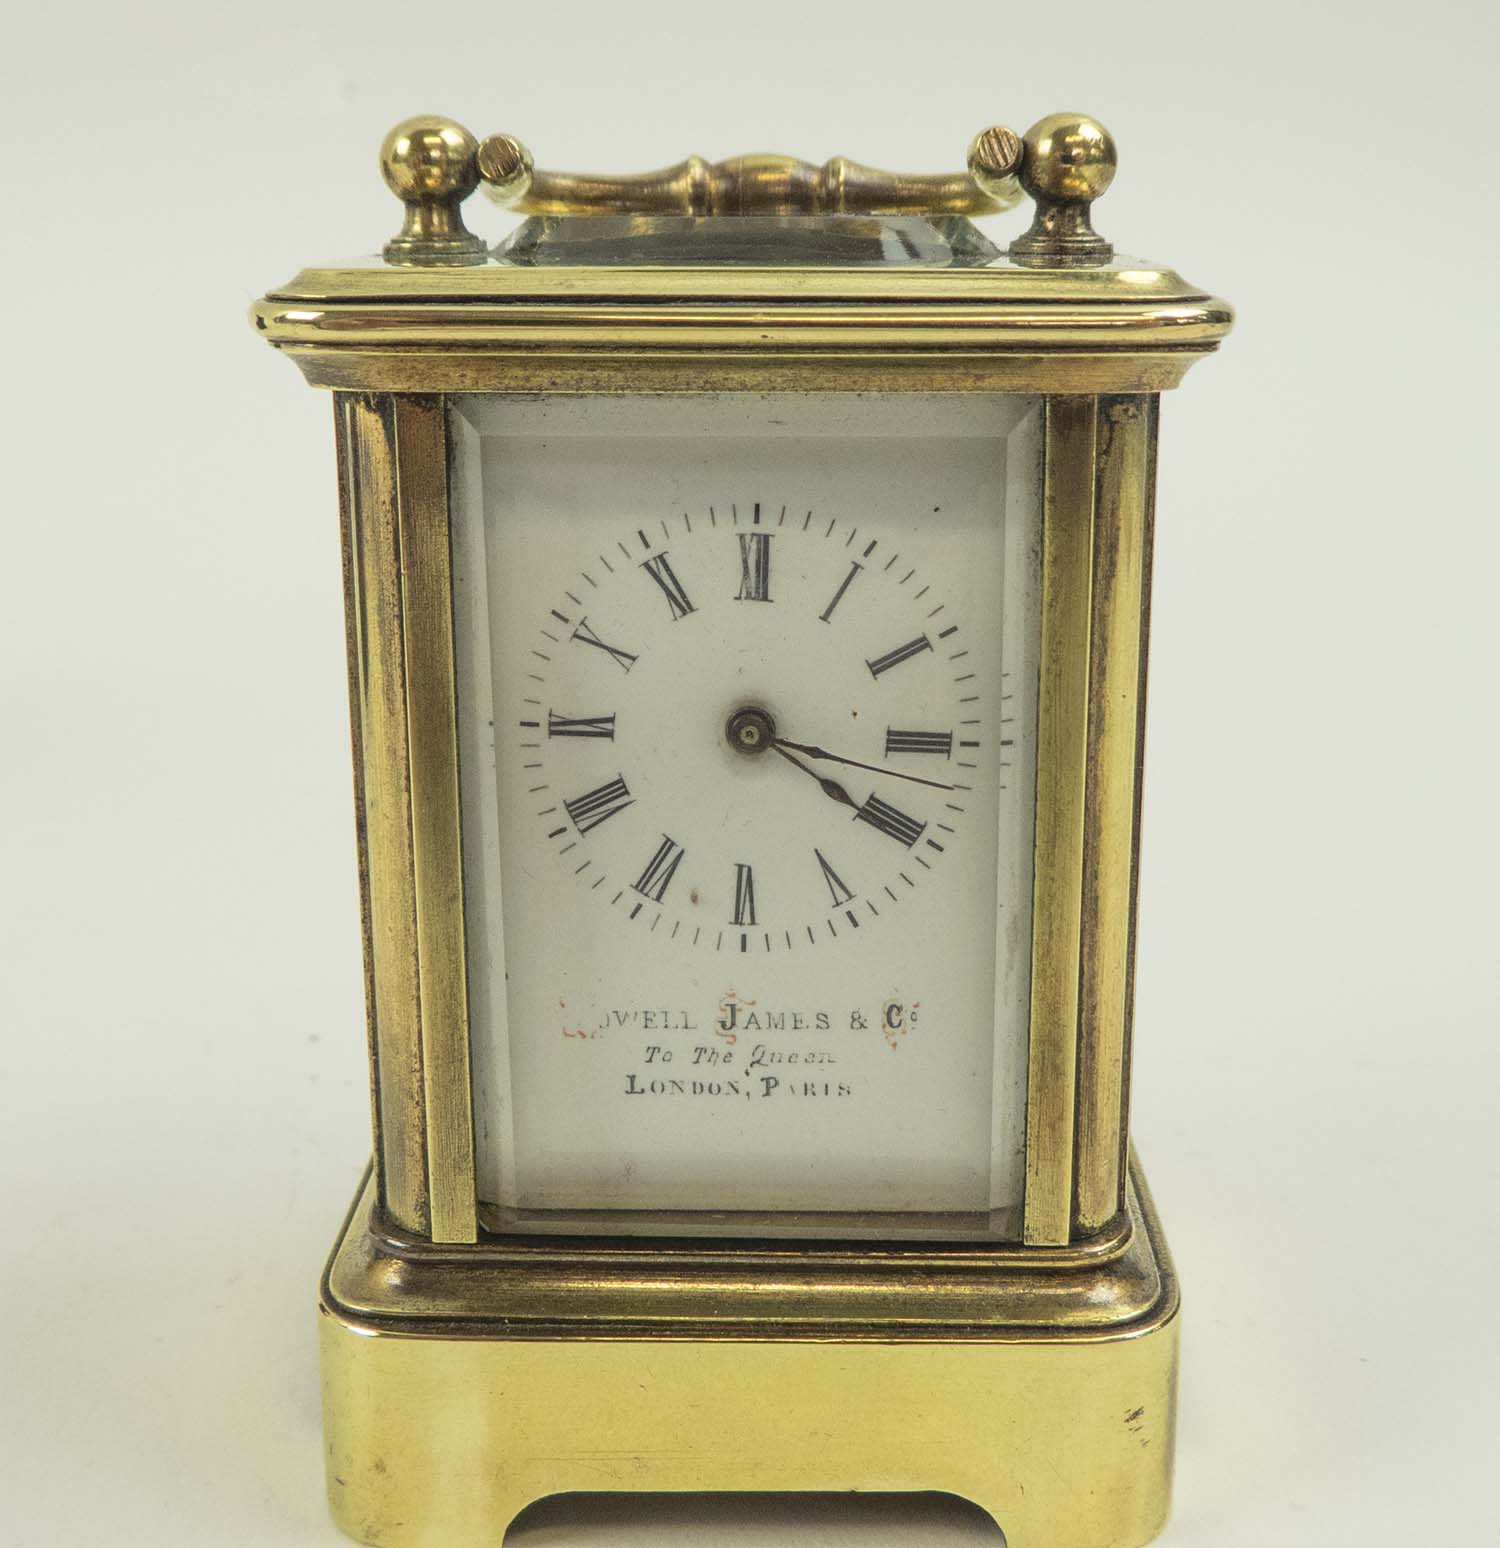 MINIATURE HOWELL JAMES & CO. CARRIAGE CLOCK, with brass case, French movement, 4.5cm W x 4cm D x 6. - Image 6 of 9